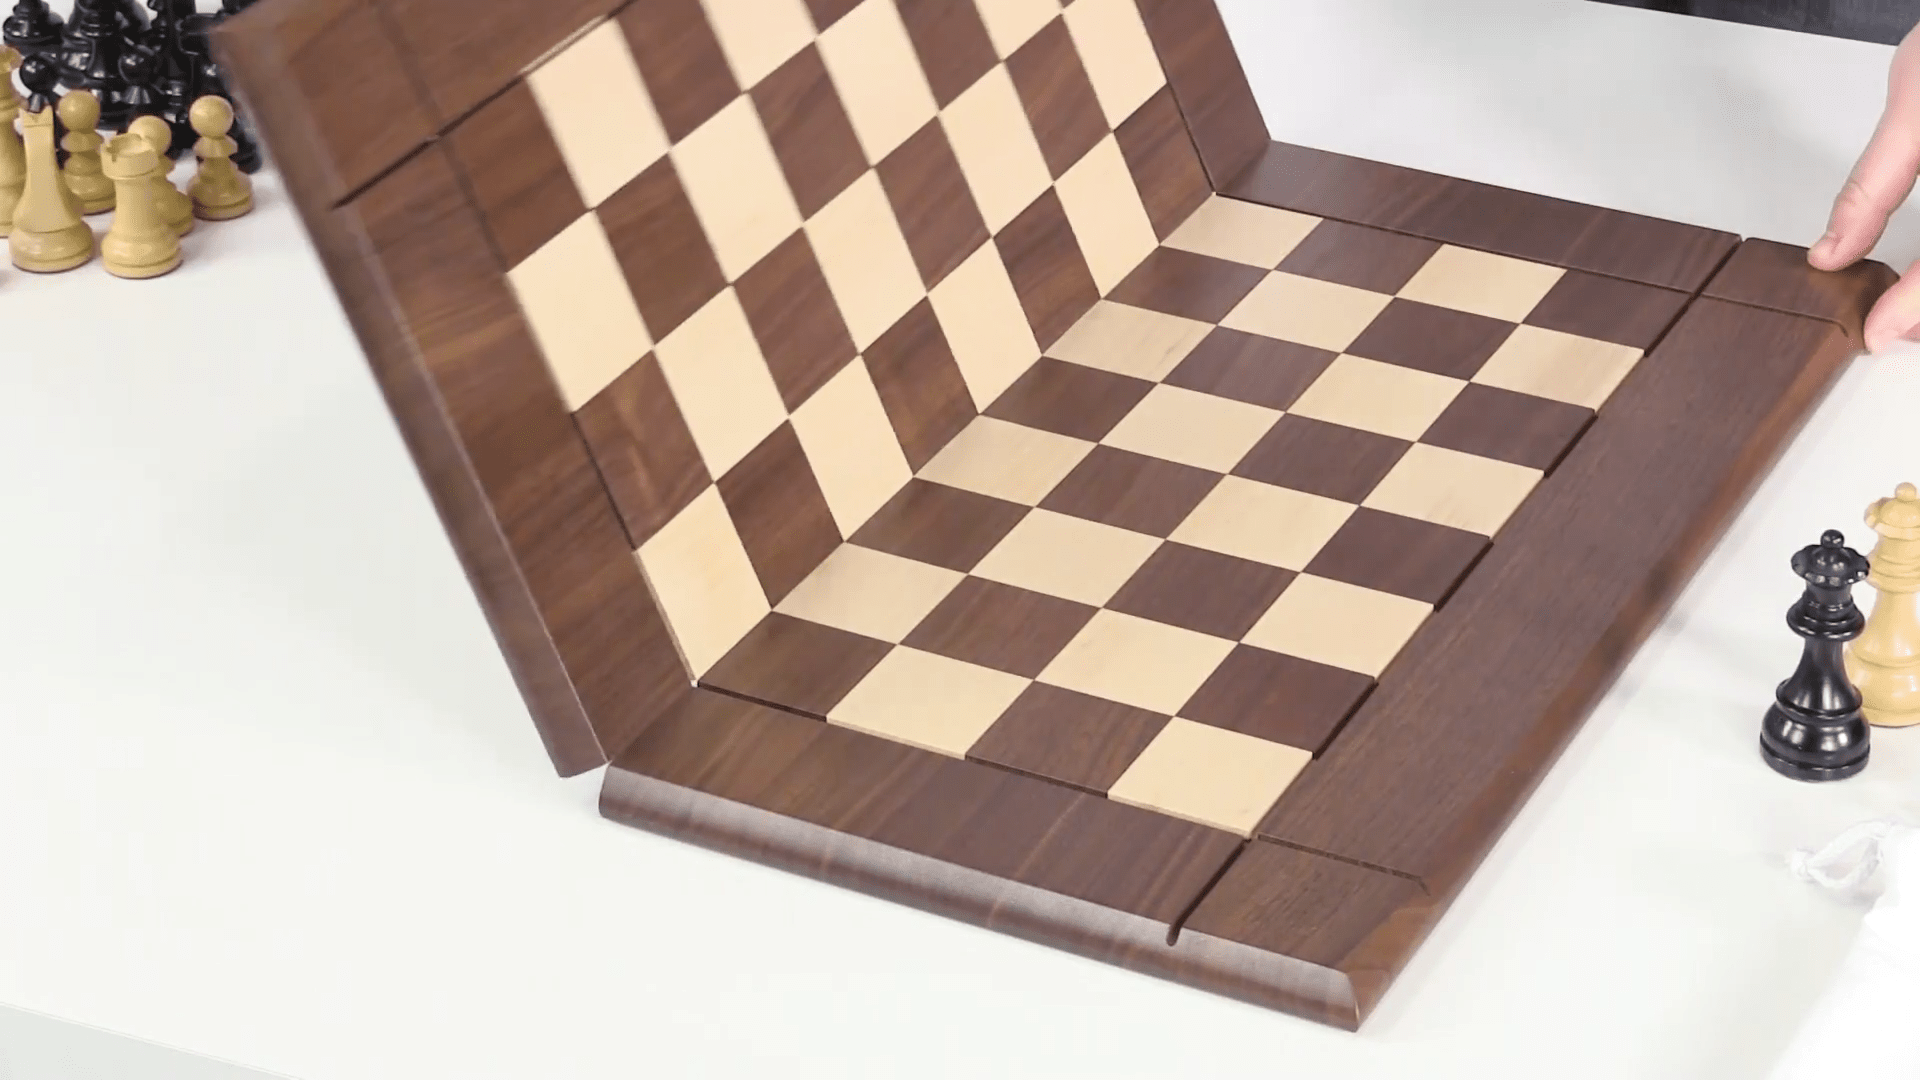 This Incredible Rook Tower Has a Pack-away Flexible Wooden Chess Board That  Wraps Around It